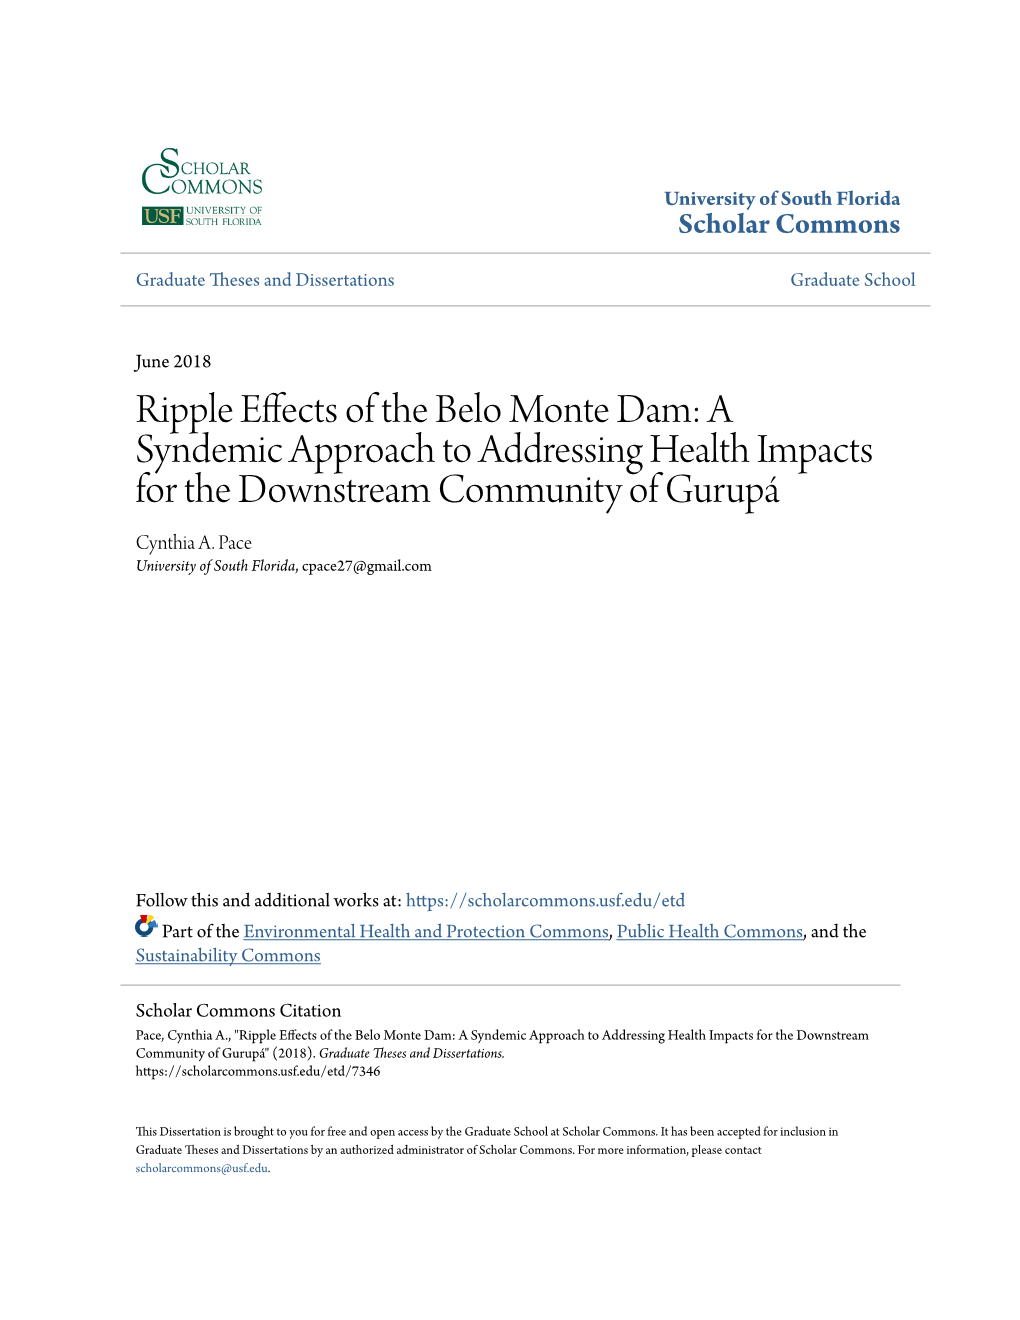 Ripple Effects of the Belo Monte Dam: a Syndemic Approach to Addressing Health Impacts for the Downstream Community of Gurupá Cynthia A